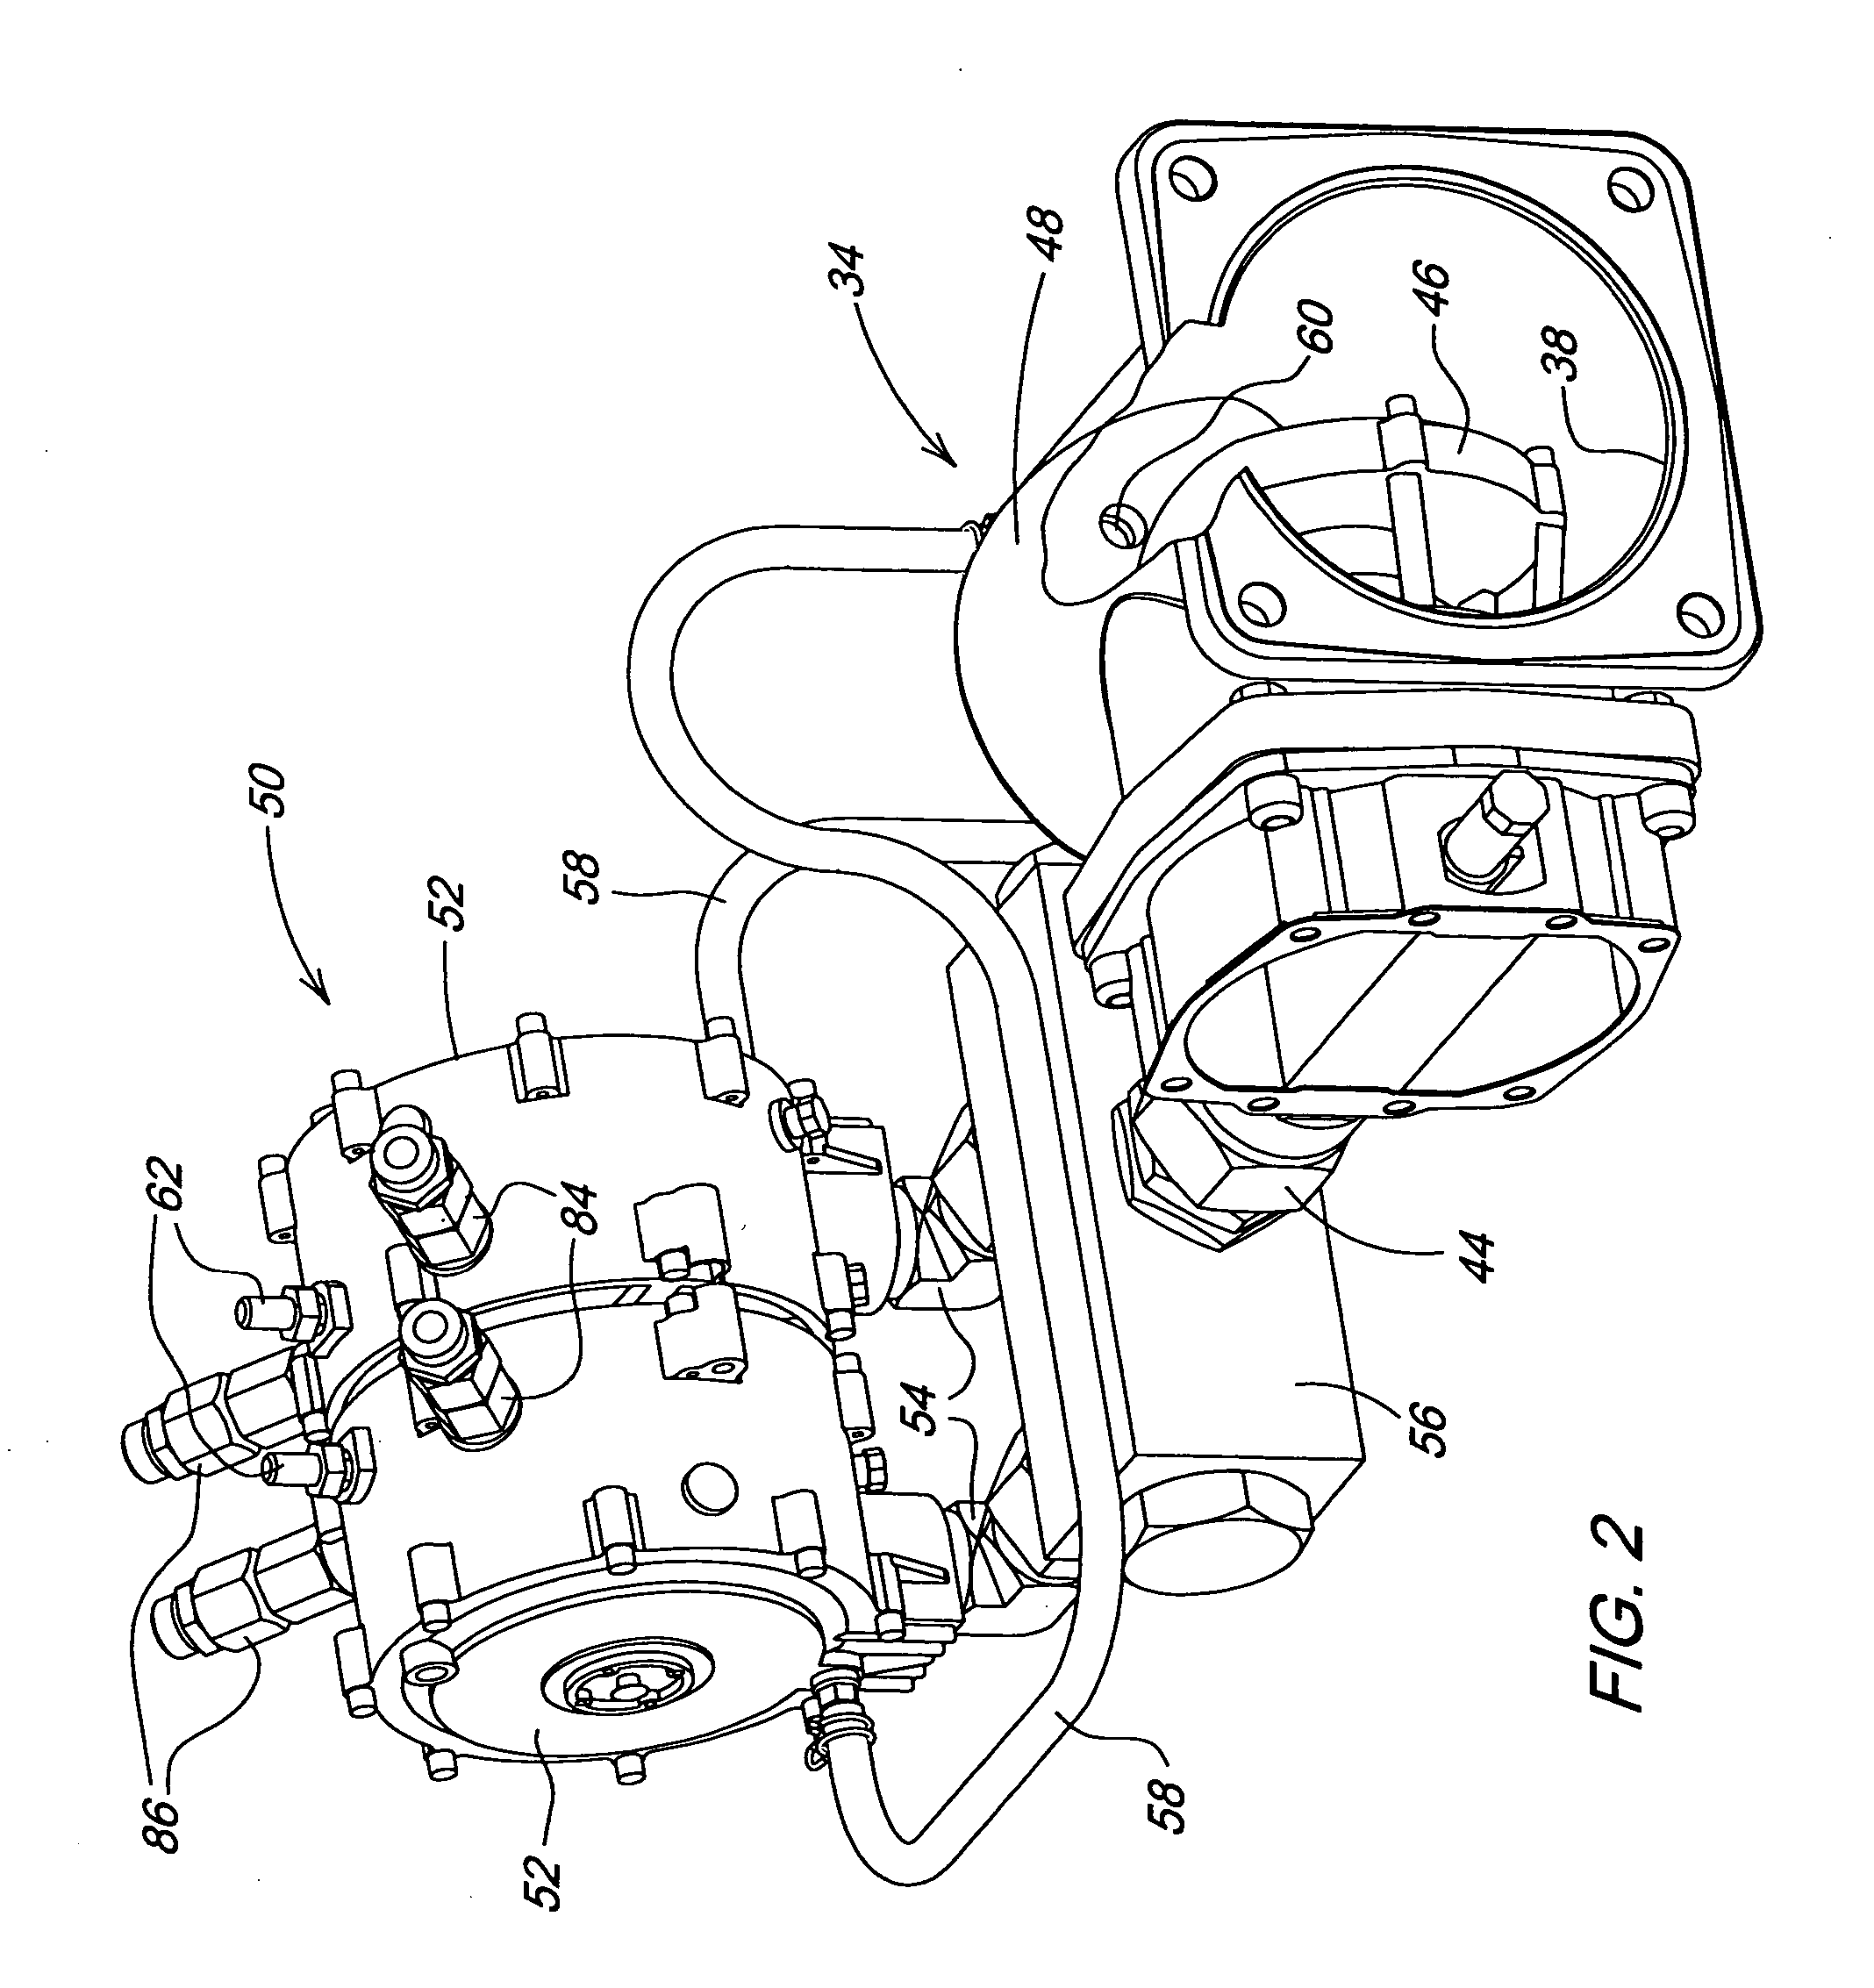 Fuel system for premix burner of a direct-fired steam generator